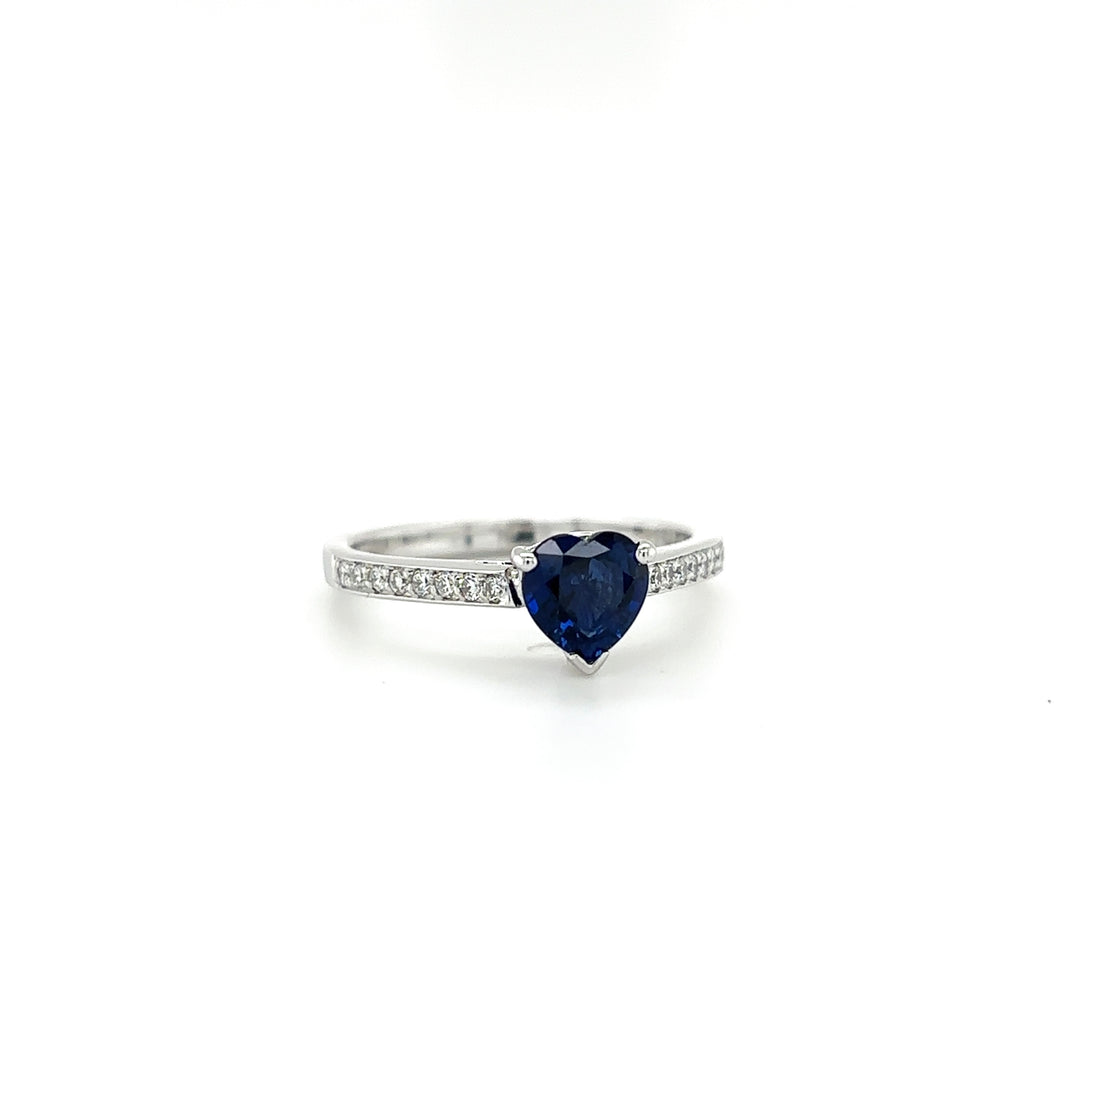 18ct White Gold Heart Cut Blue Sapphire And Diamond Ring